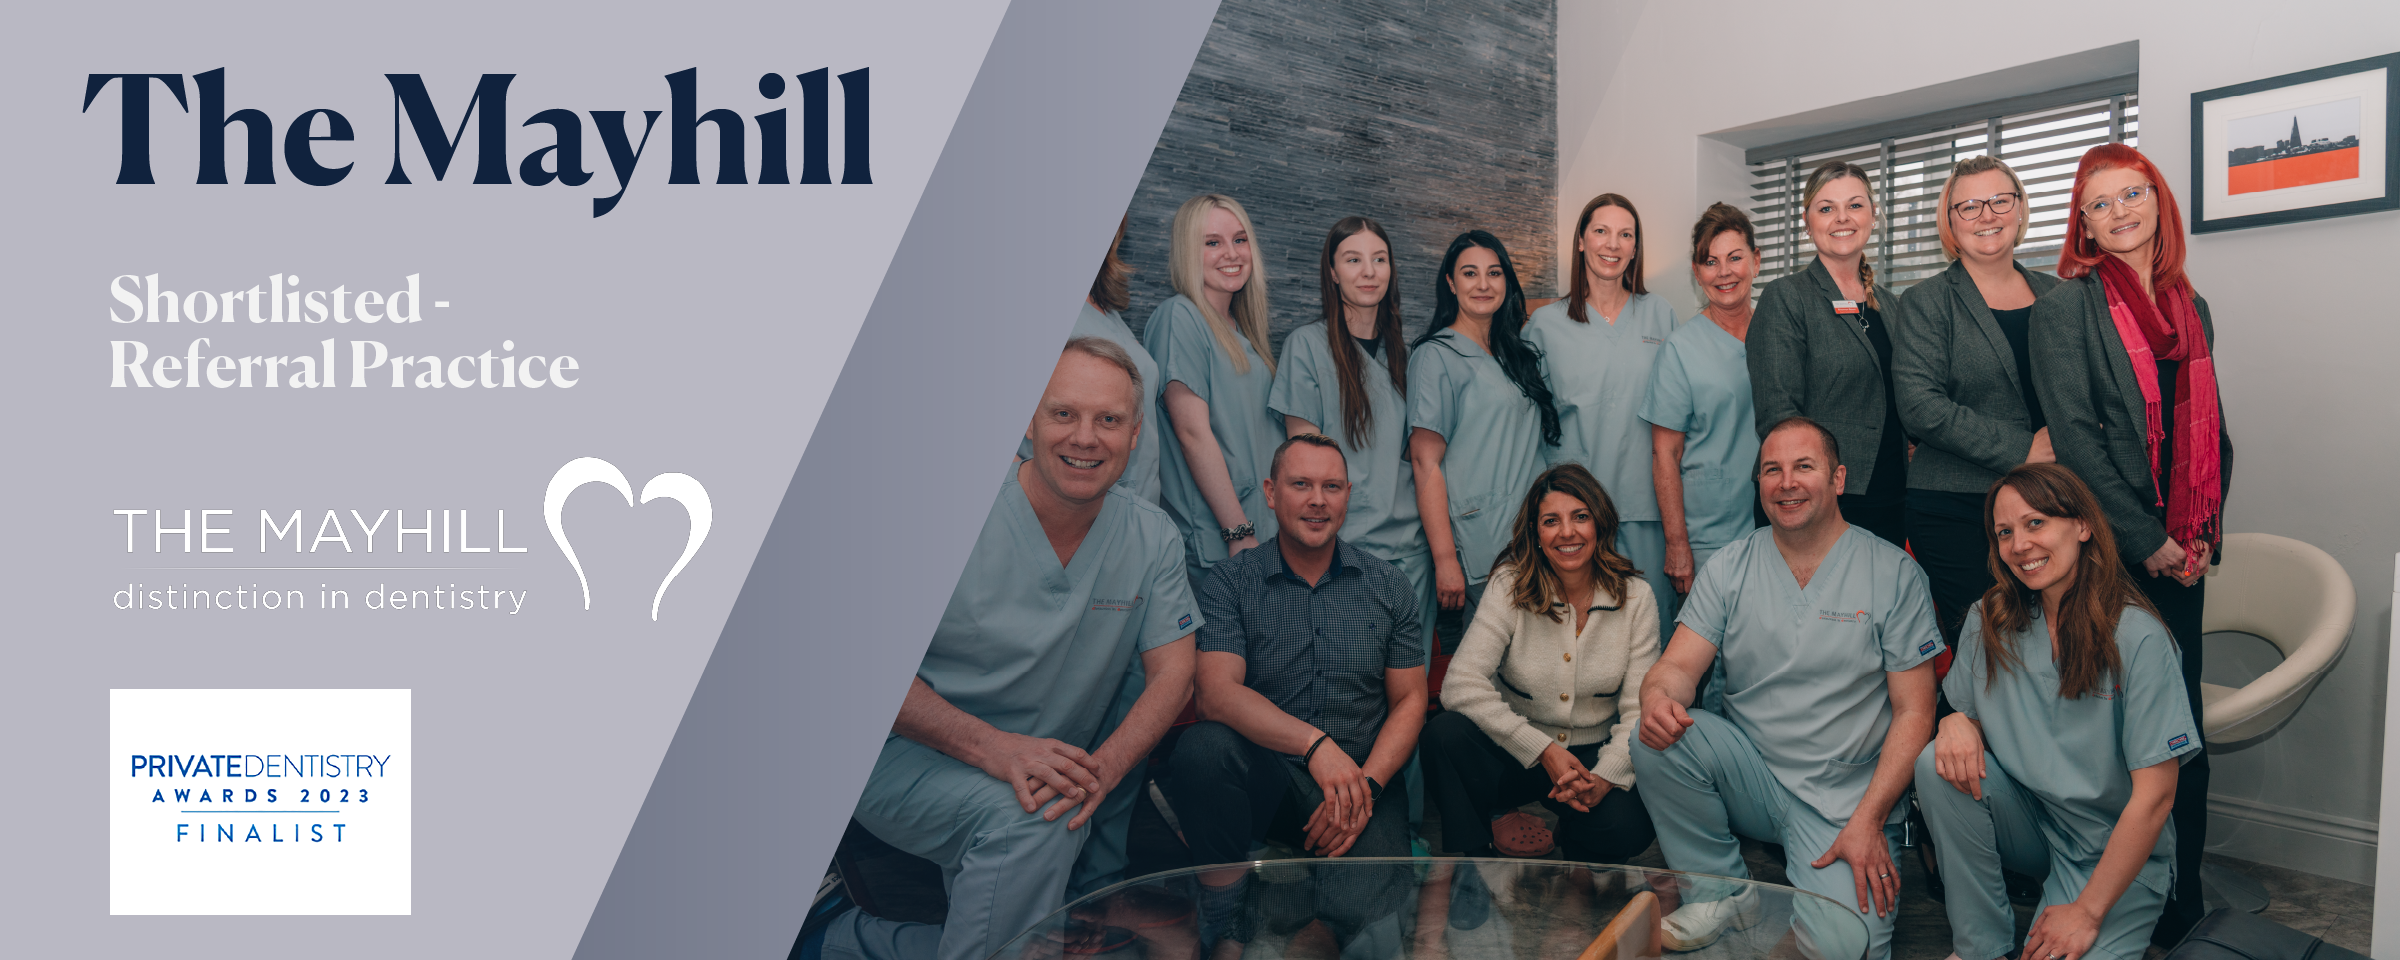 Beyond Excellence: The Mayhill shines as Finalists for 'Referral Practice' at The Private Dentistry Awards 2023